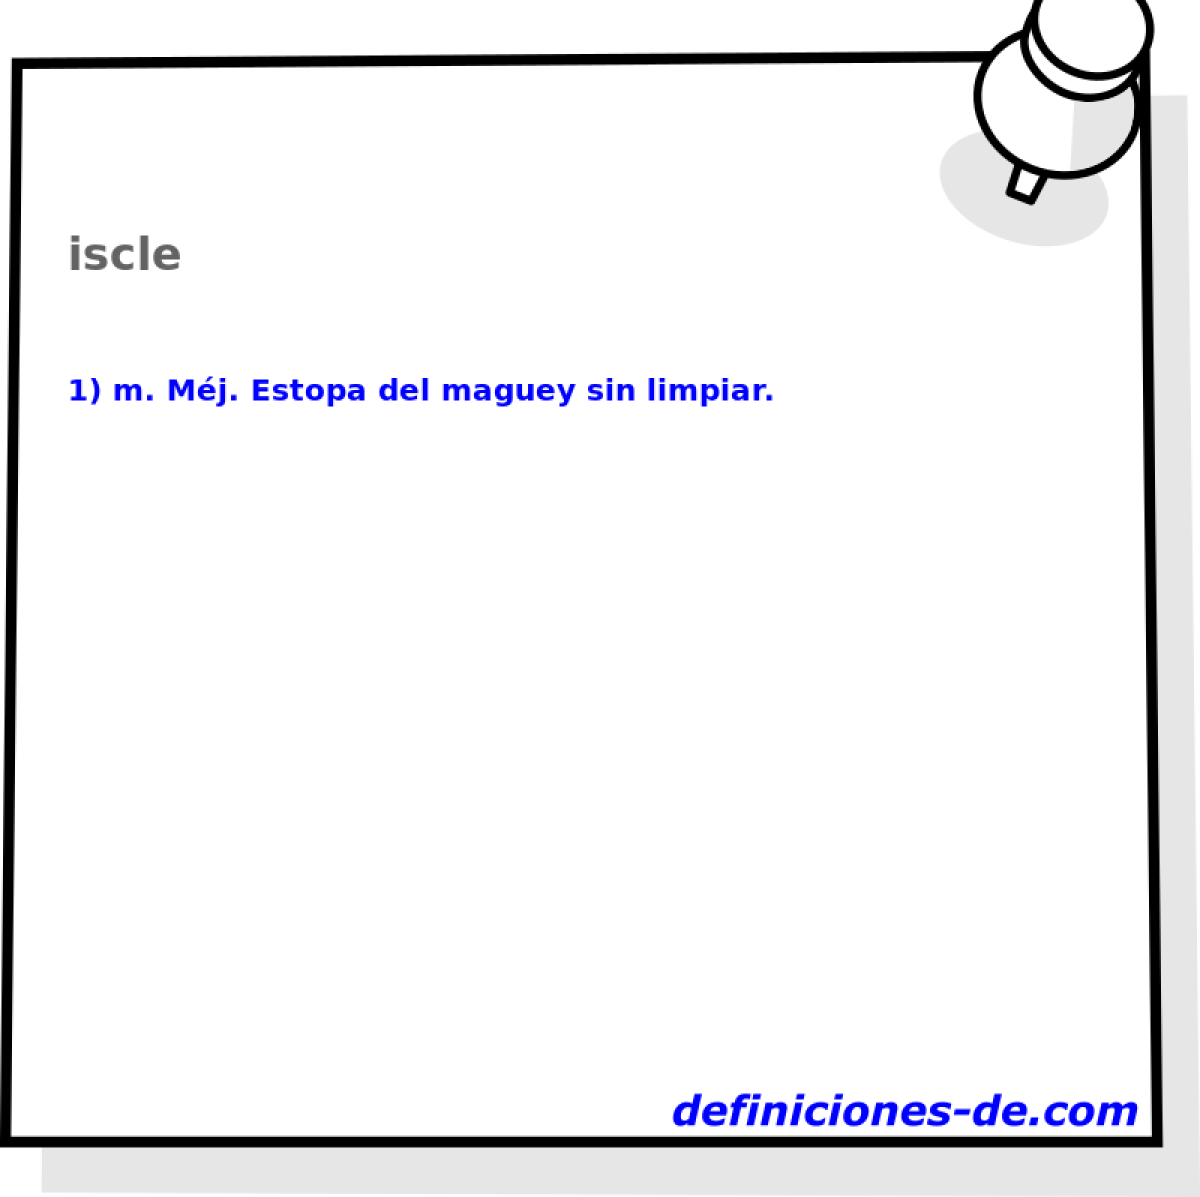 iscle 